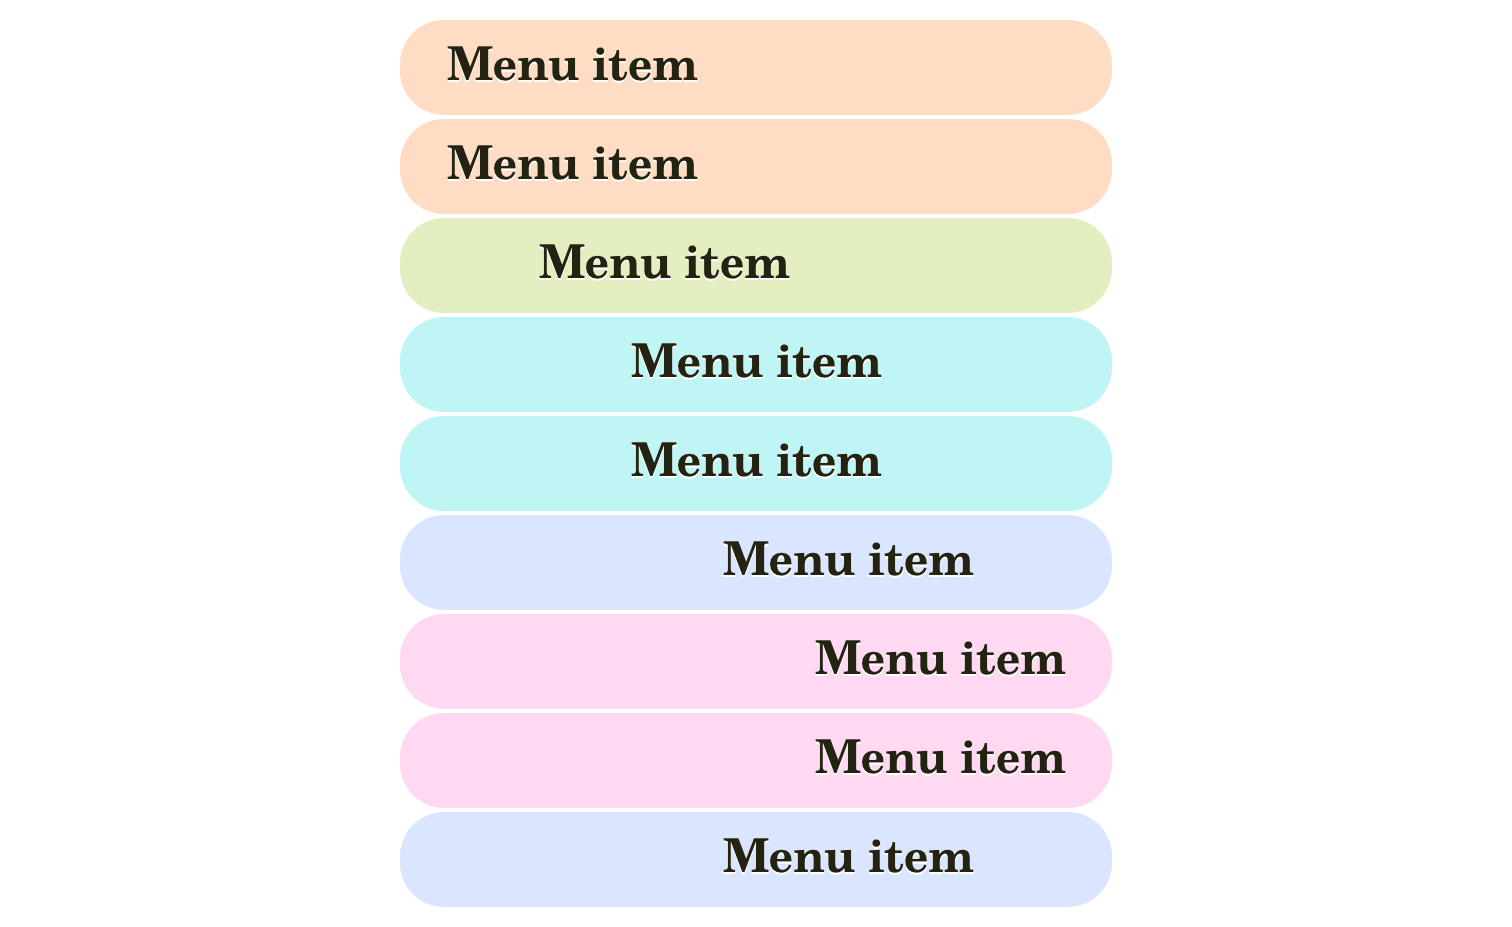 A screenshot of an example, showing a menu with nine elements, each with “Menu item” text, in five levels of nesting, with background going from red to purple based on it, and with the left padding increasing with each level of nesting.